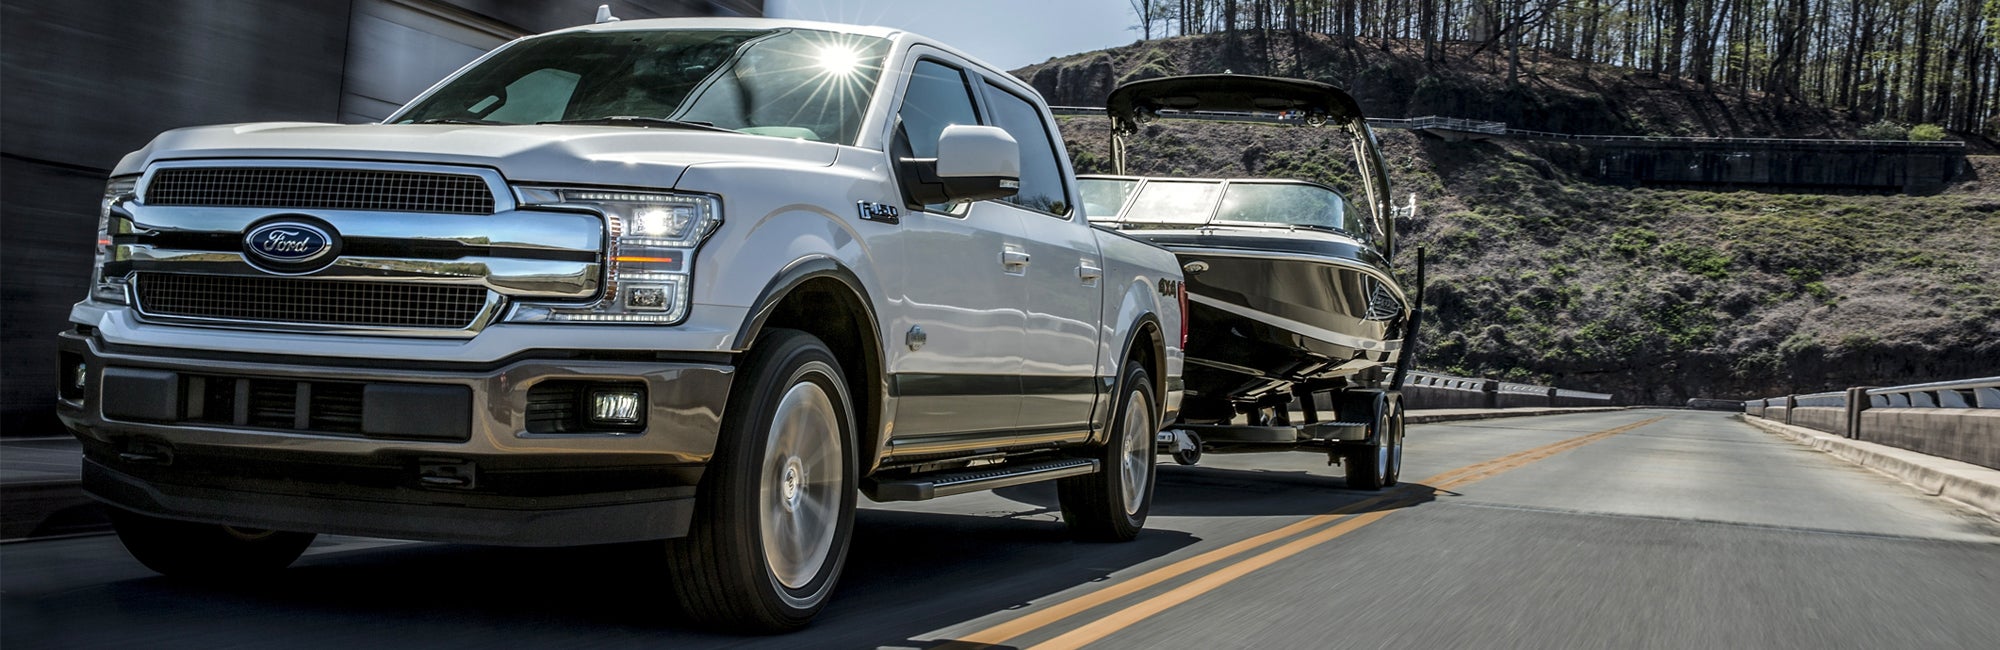 2020 Ford F-150 | Towing Capacity & More | Buss Ford 2020 F 150 5.0 L Towing Capacity